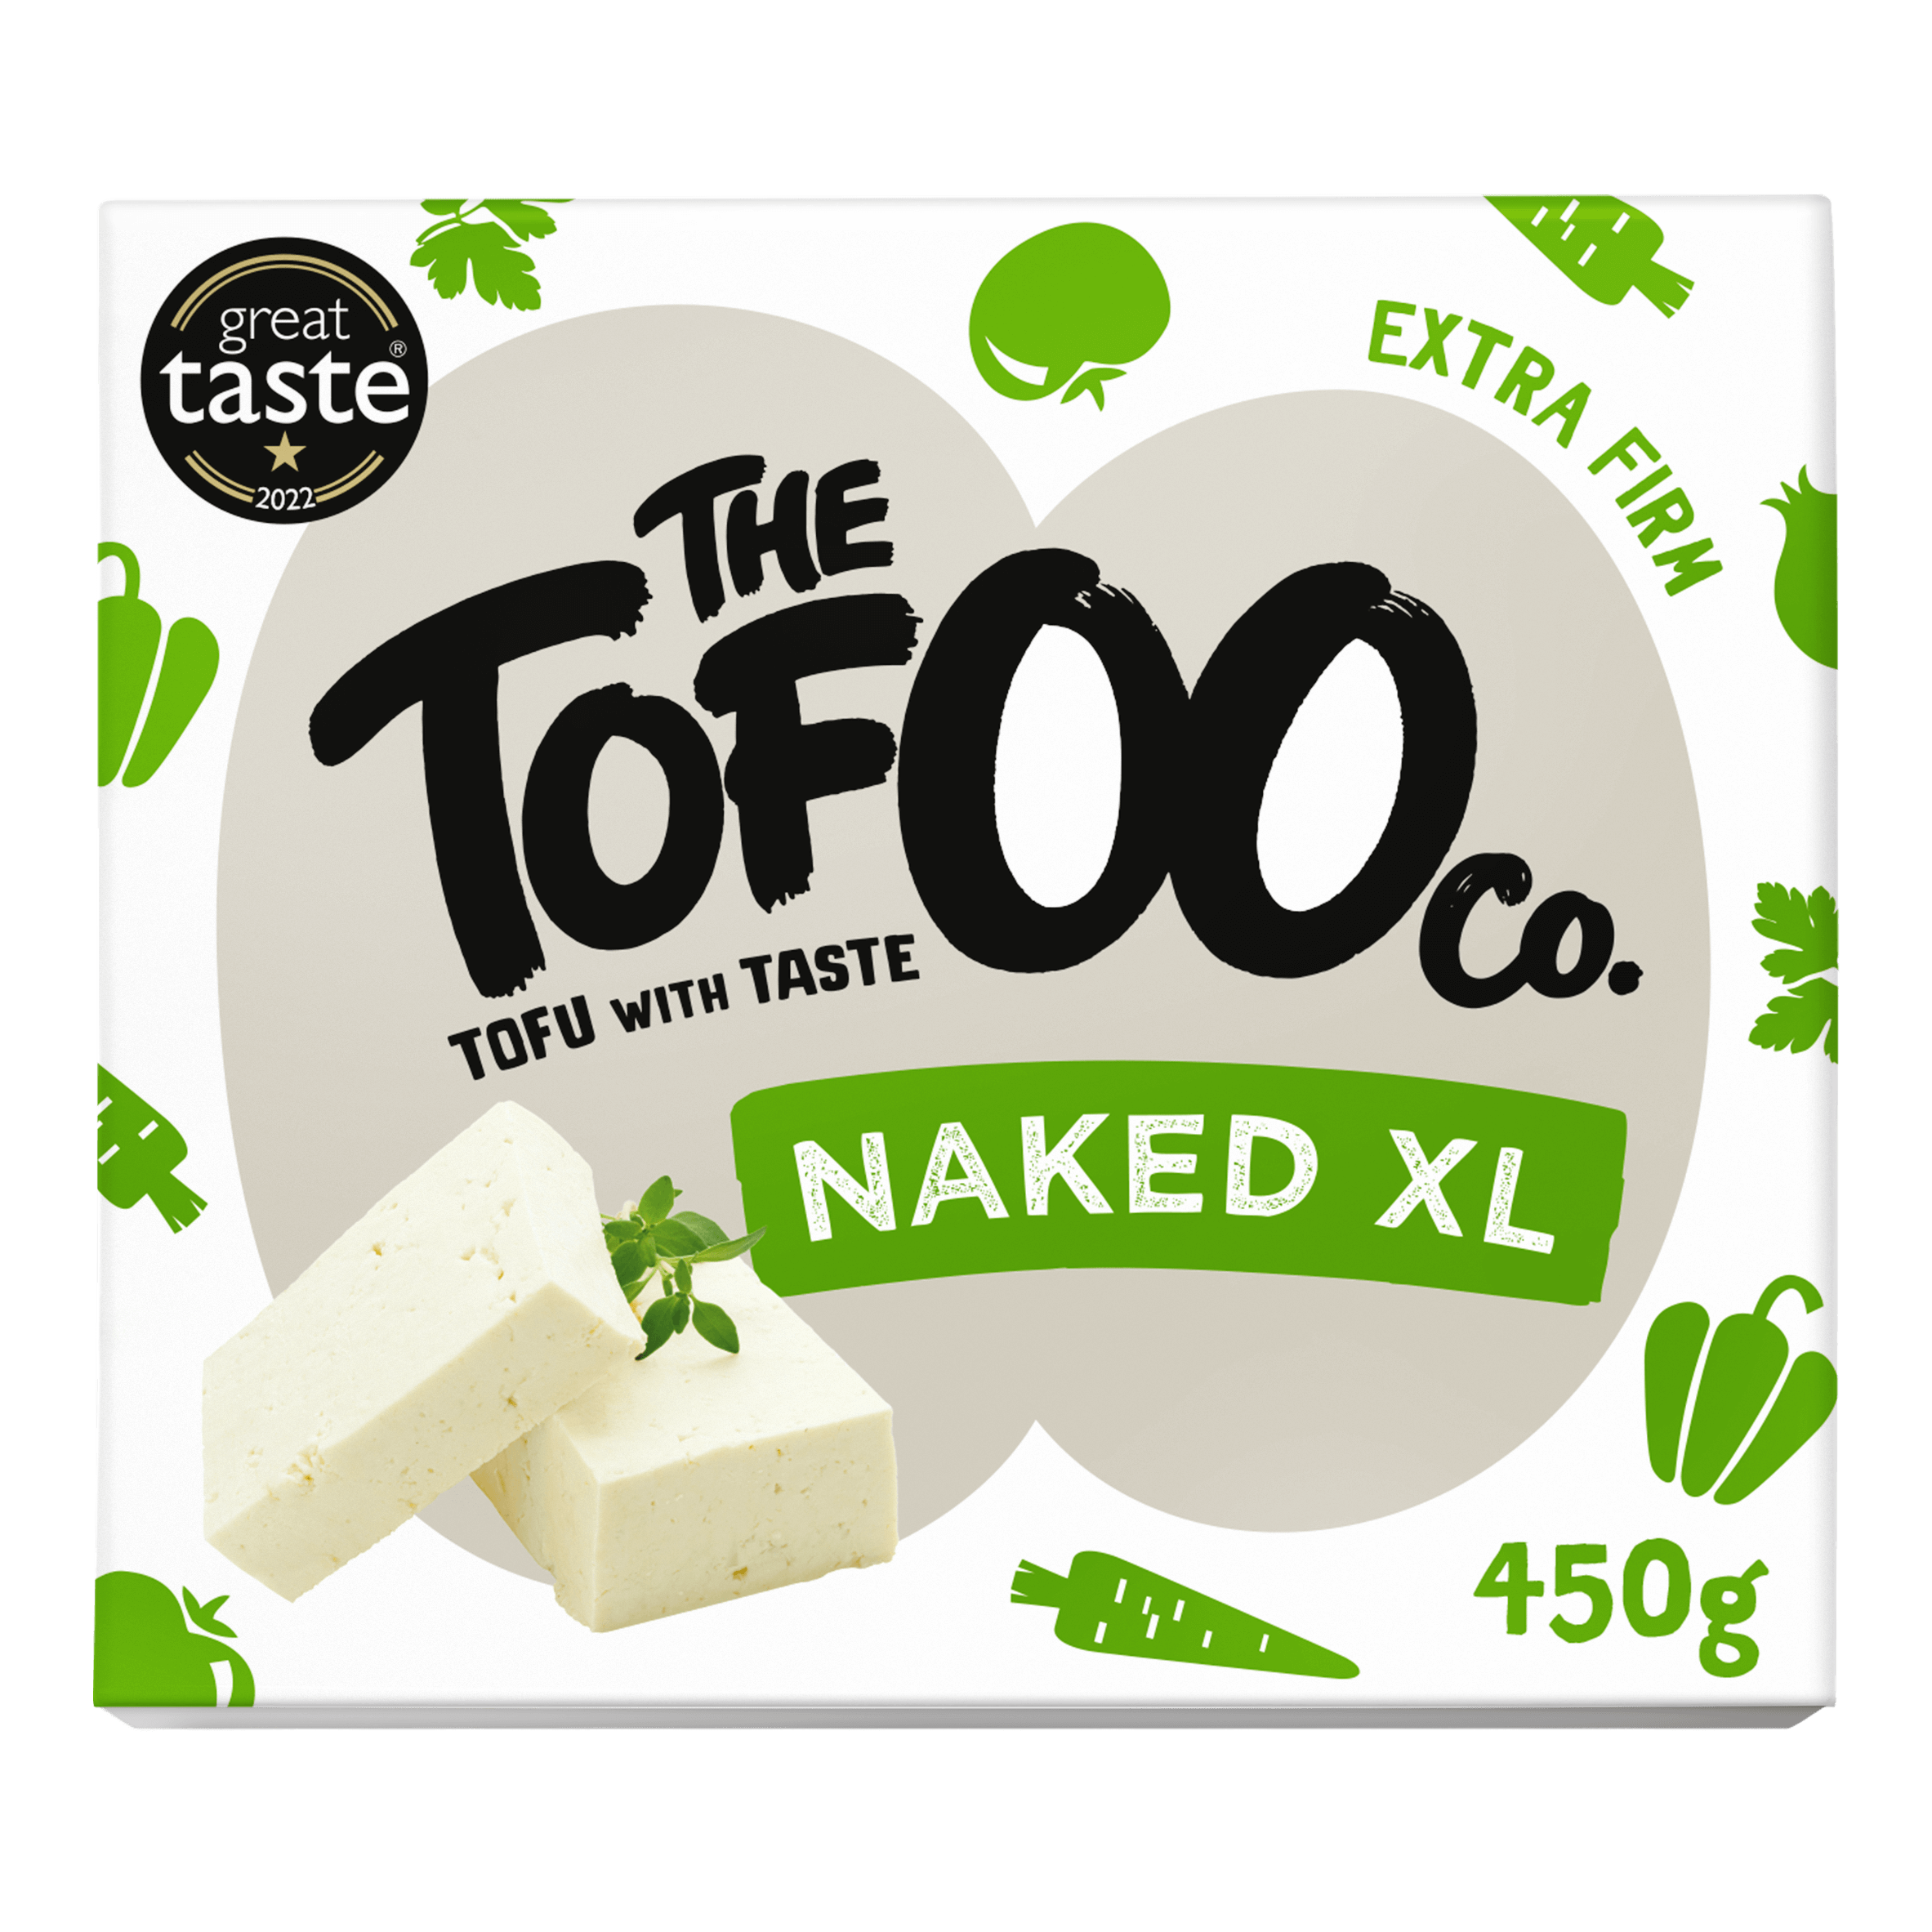 Tofoo Co Naked XL